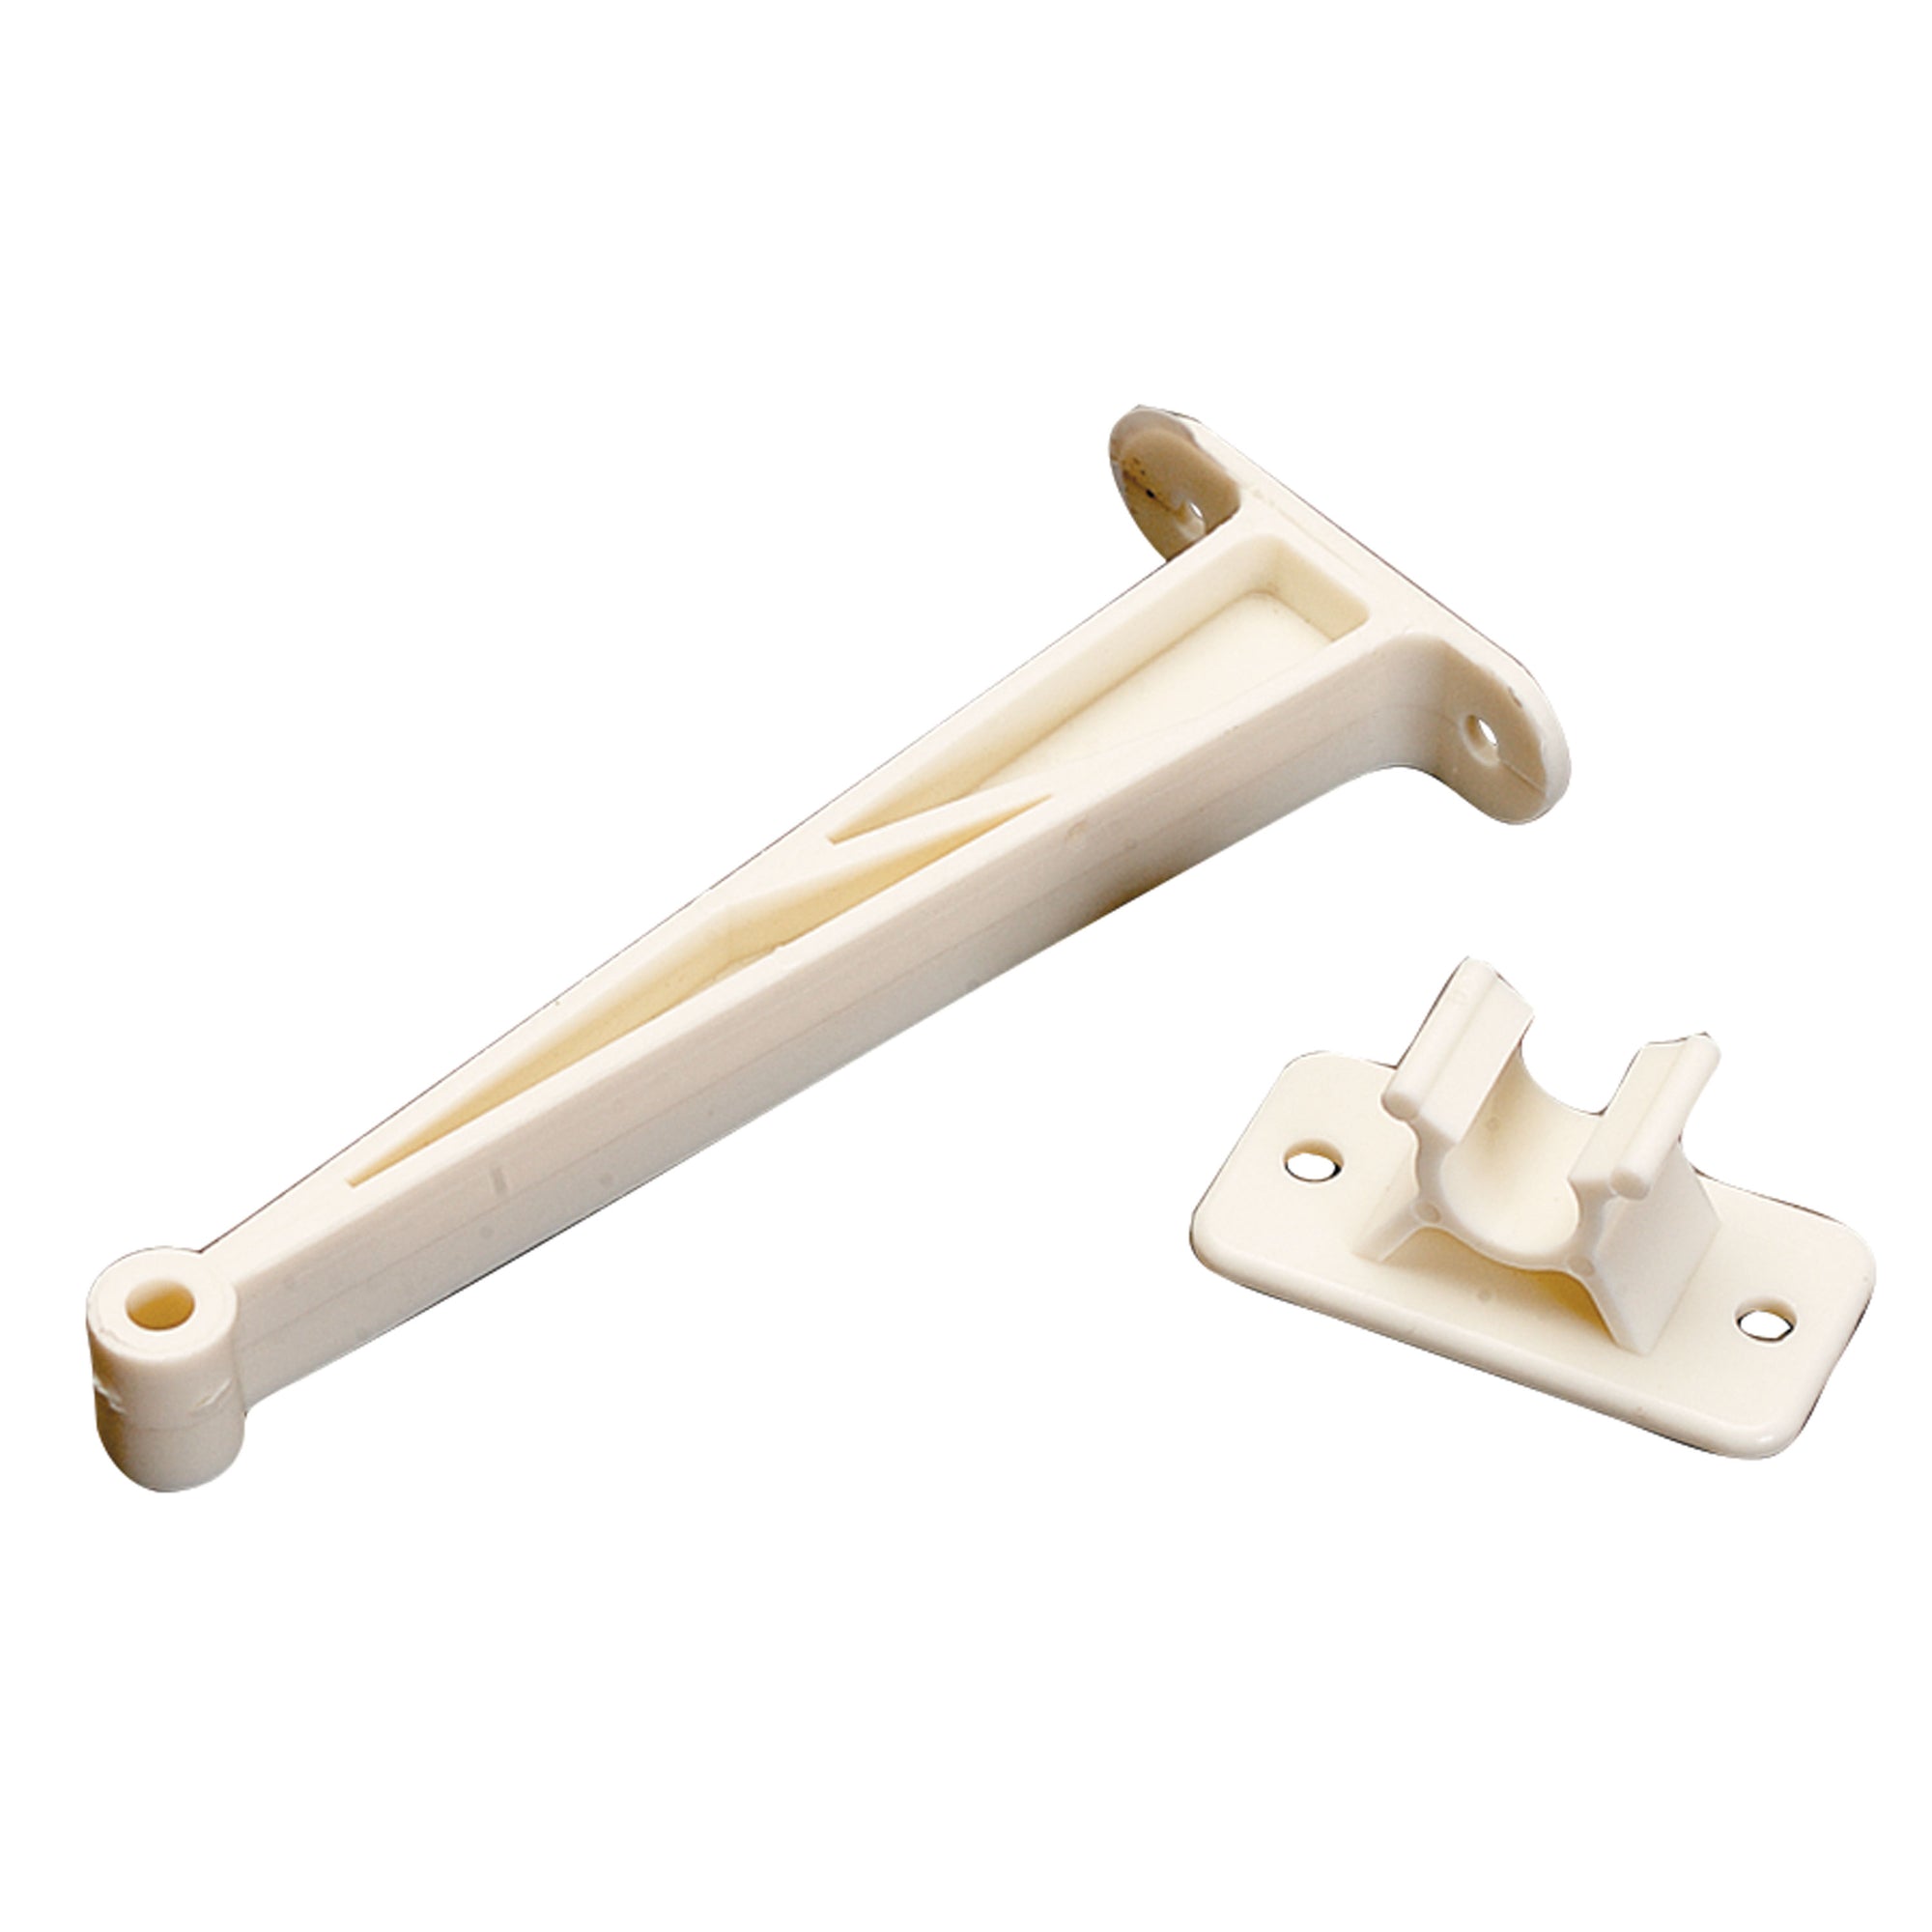 AP Products 013-087 Plastic Door Holdback - 5-1/2", Colonial White